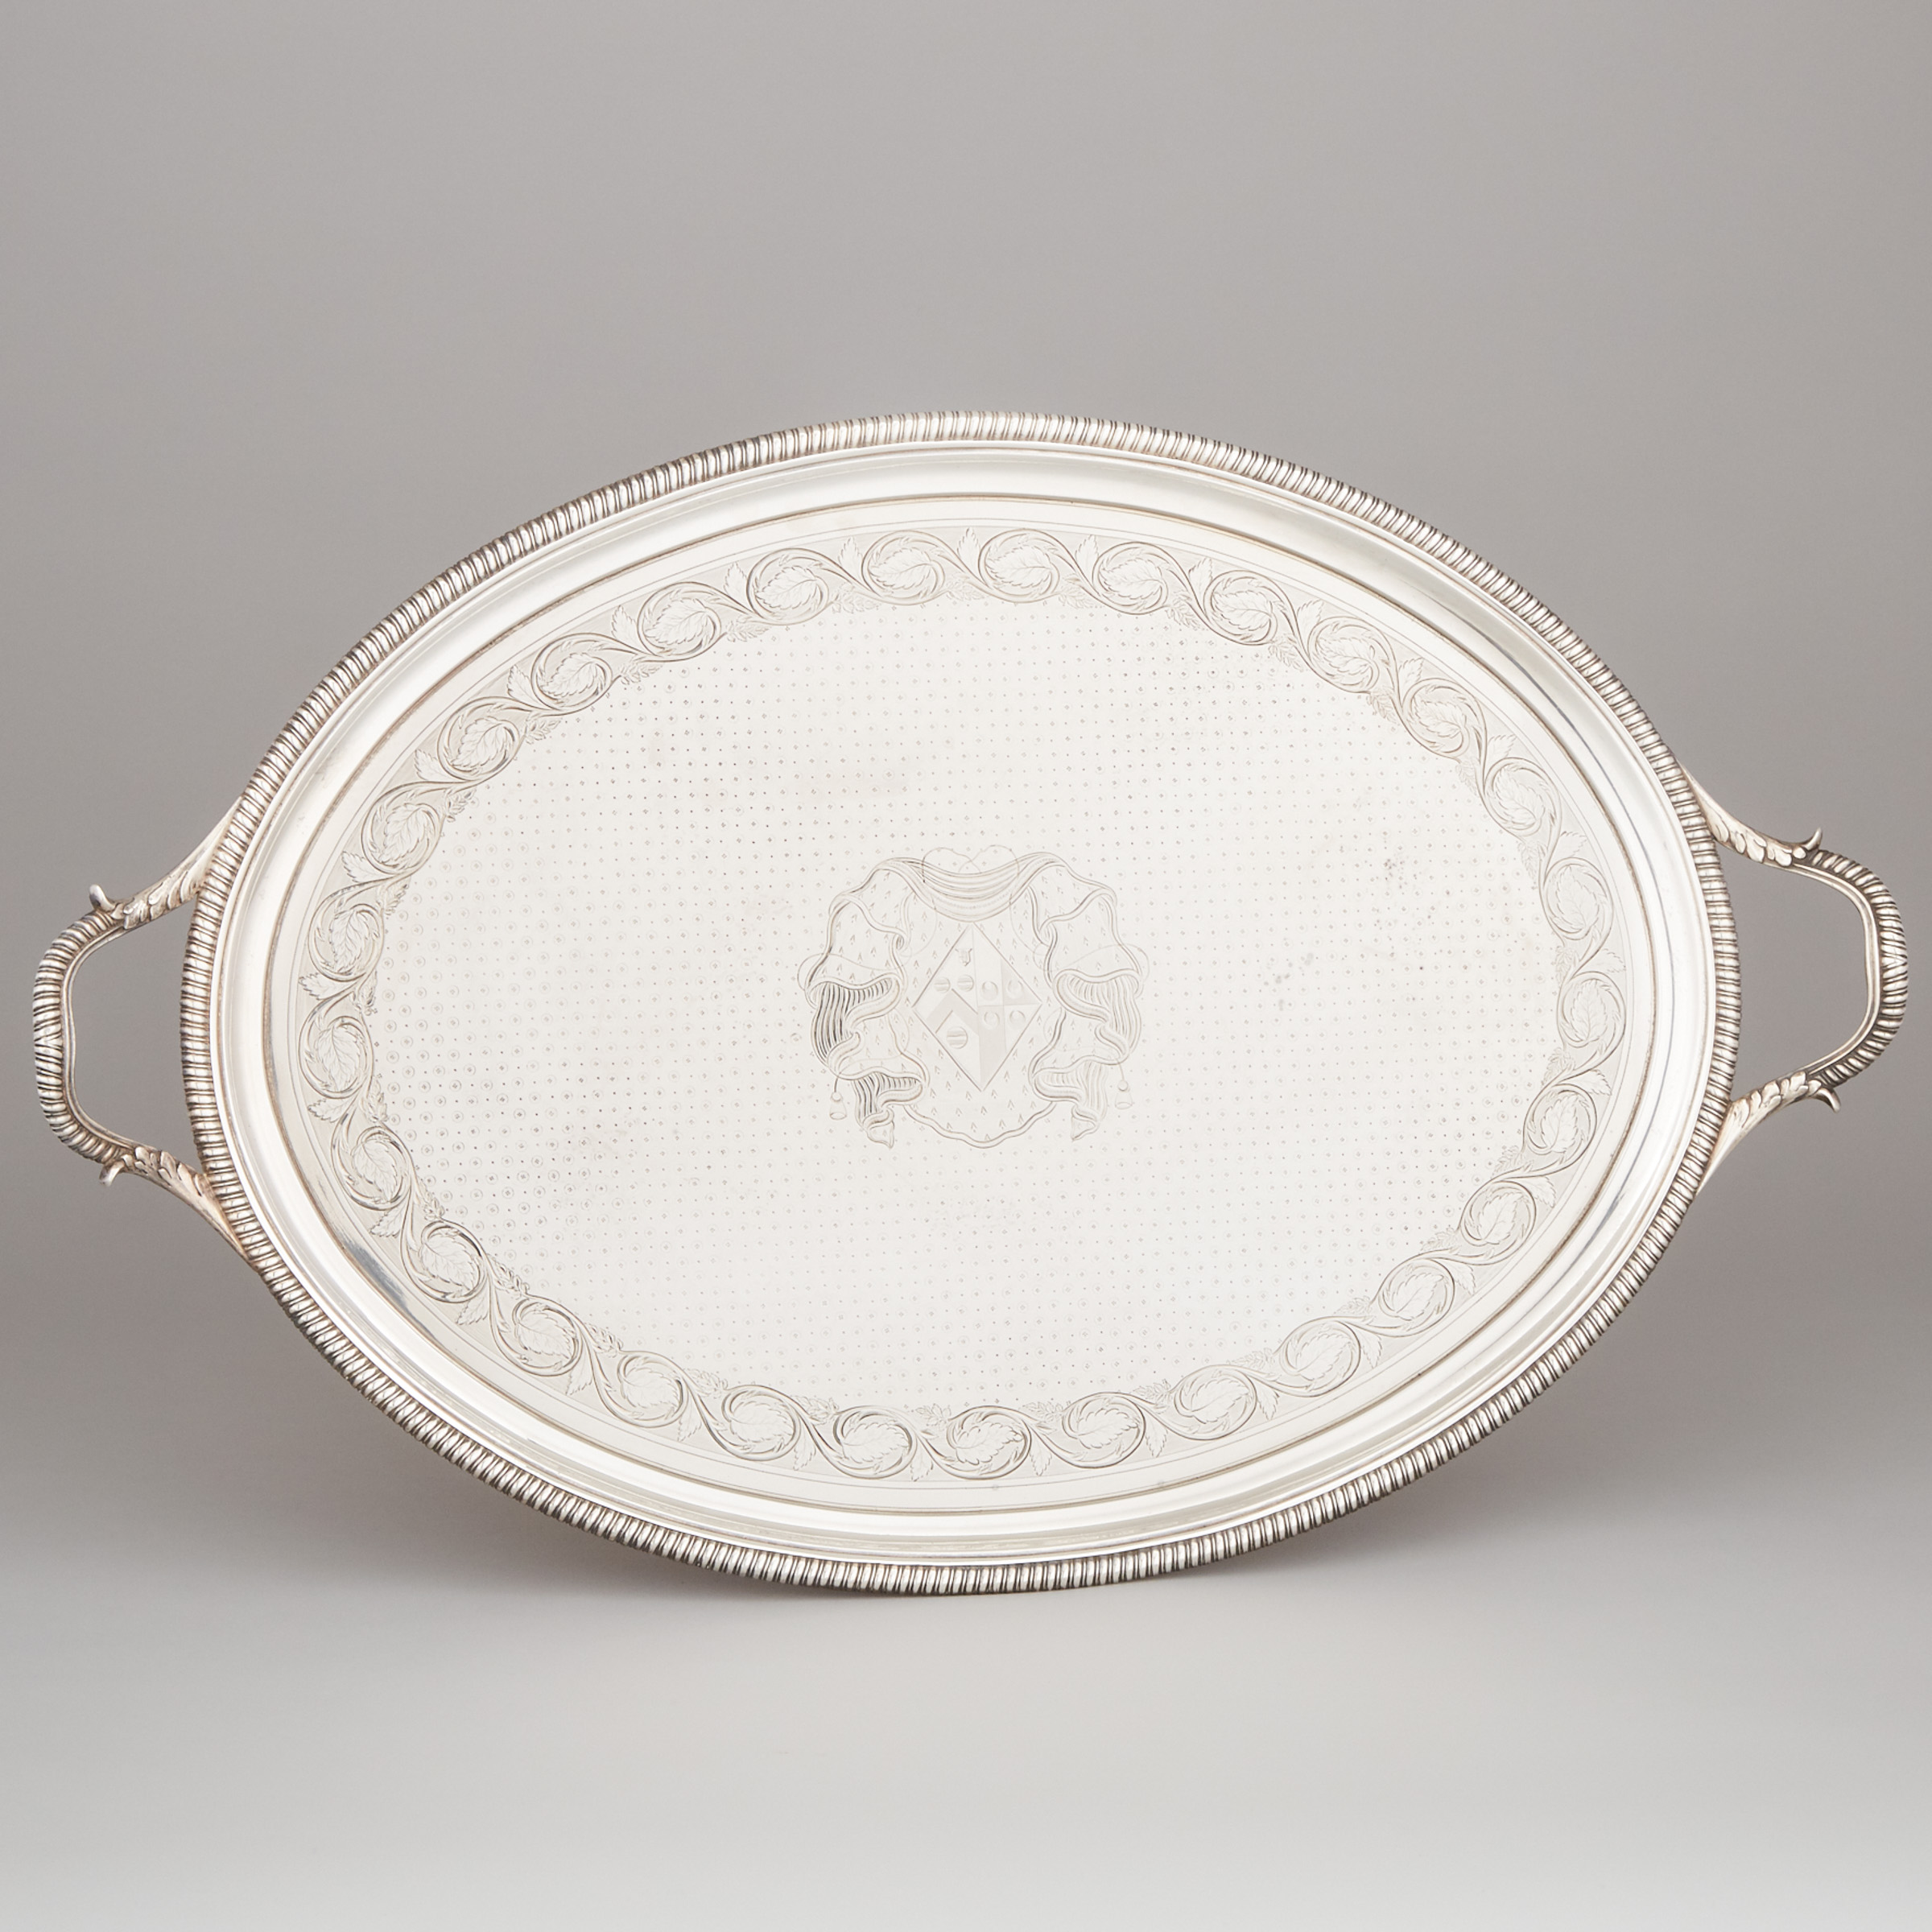 George III Silver Two-Handled Oval Serving Tray, Thomas Hannam & John Crouch, London, 1802